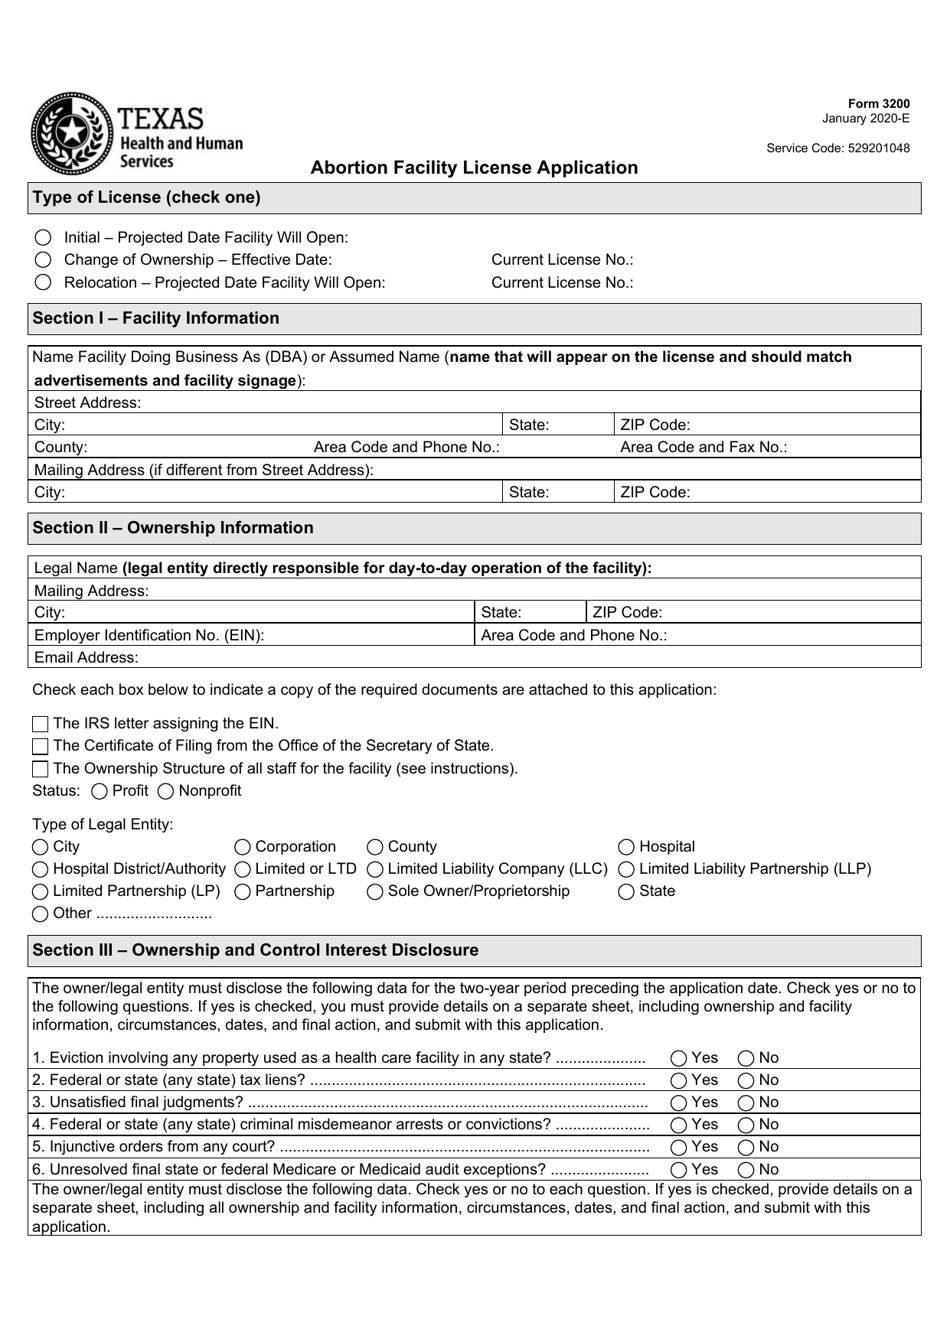 Form 3200 Abortion Facility License Application - Texas, Page 1